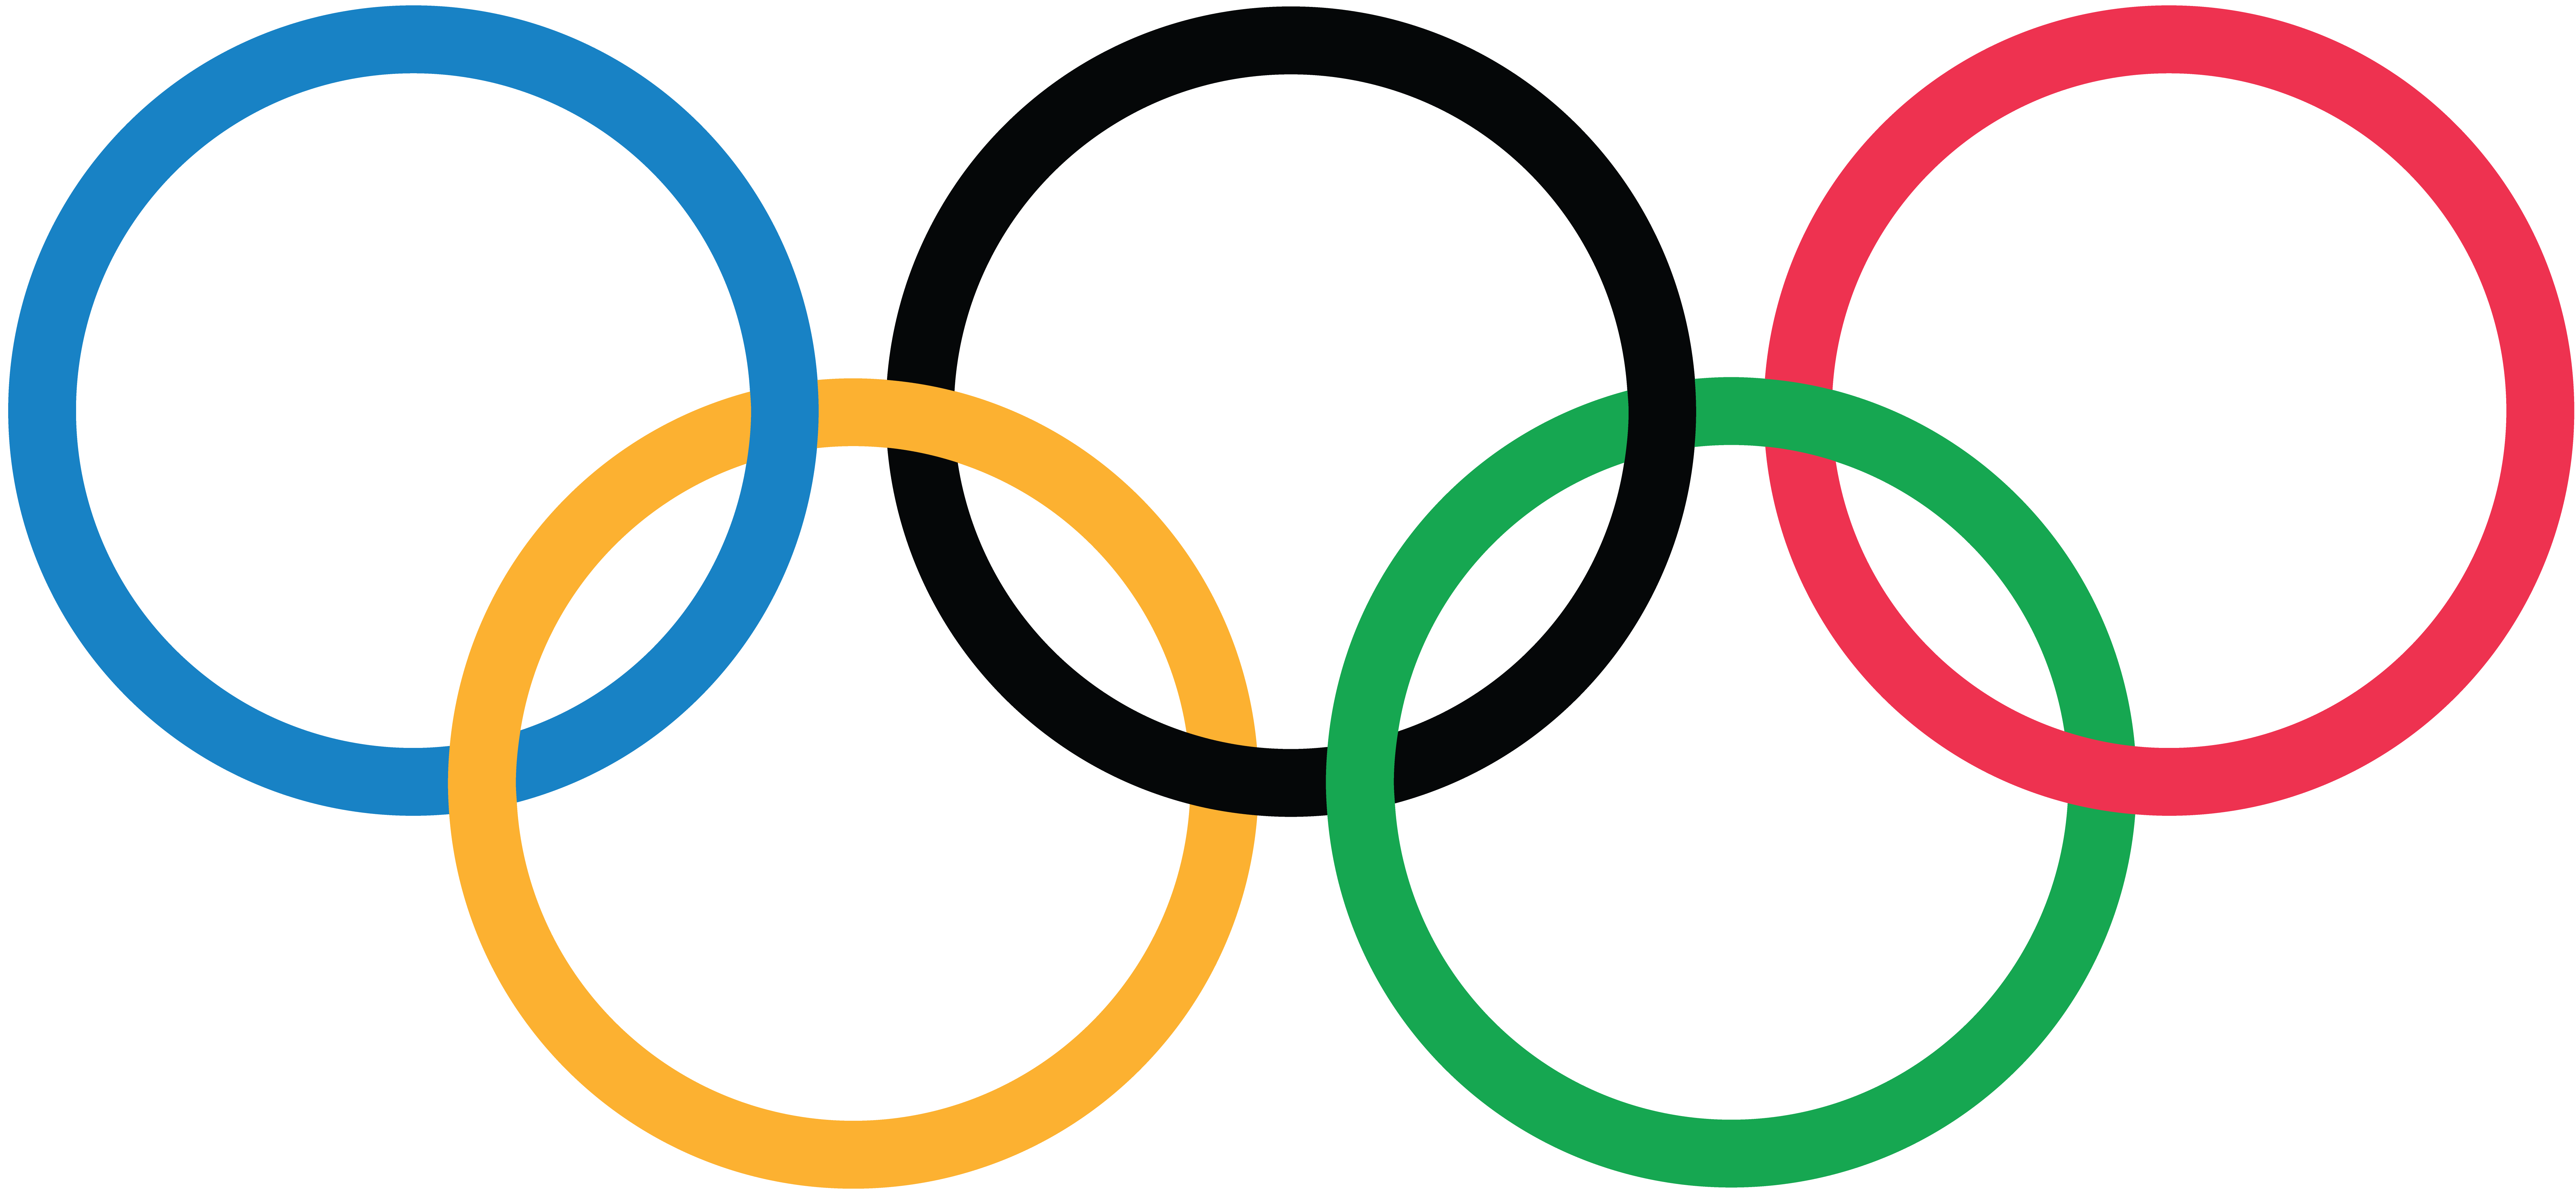 Olympic Rings Png Hd - Olympic Games Clipart Olympic Rings #5, Transparent background PNG HD thumbnail